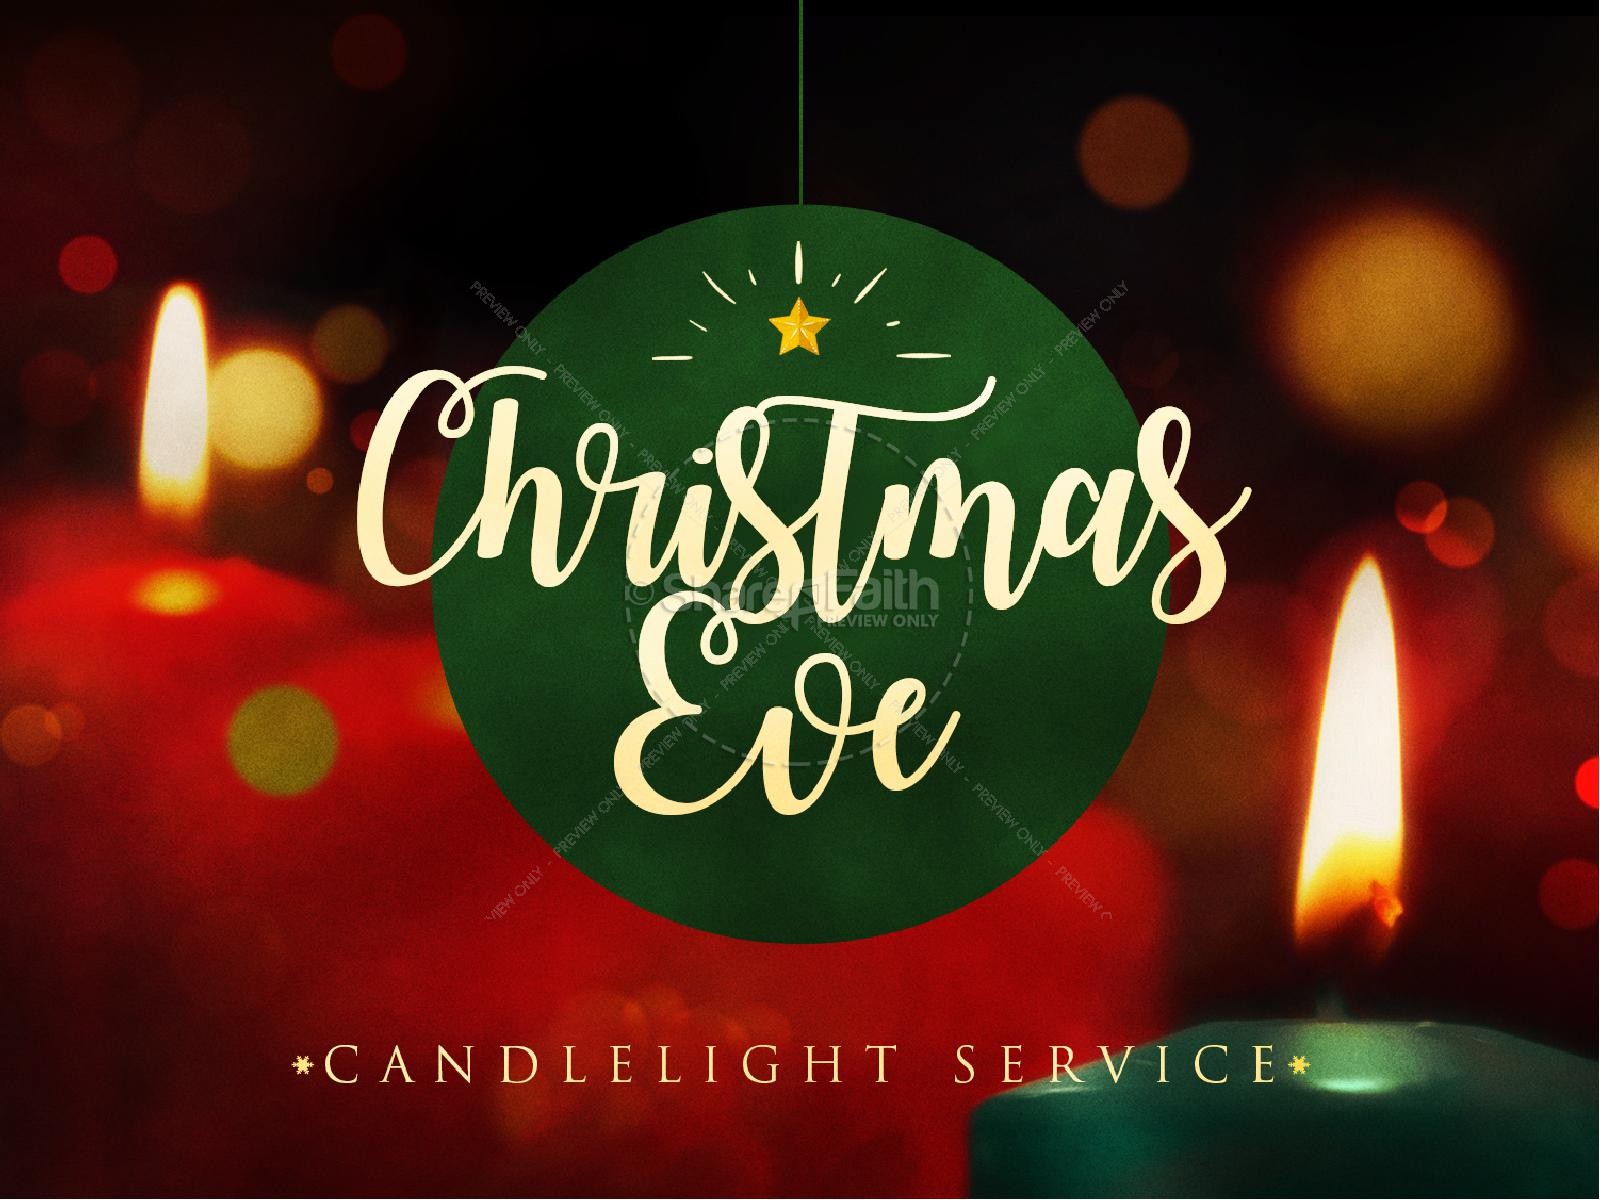 Christmas Eve Candlelight Service PowerPoint | Christmas PowerPoints